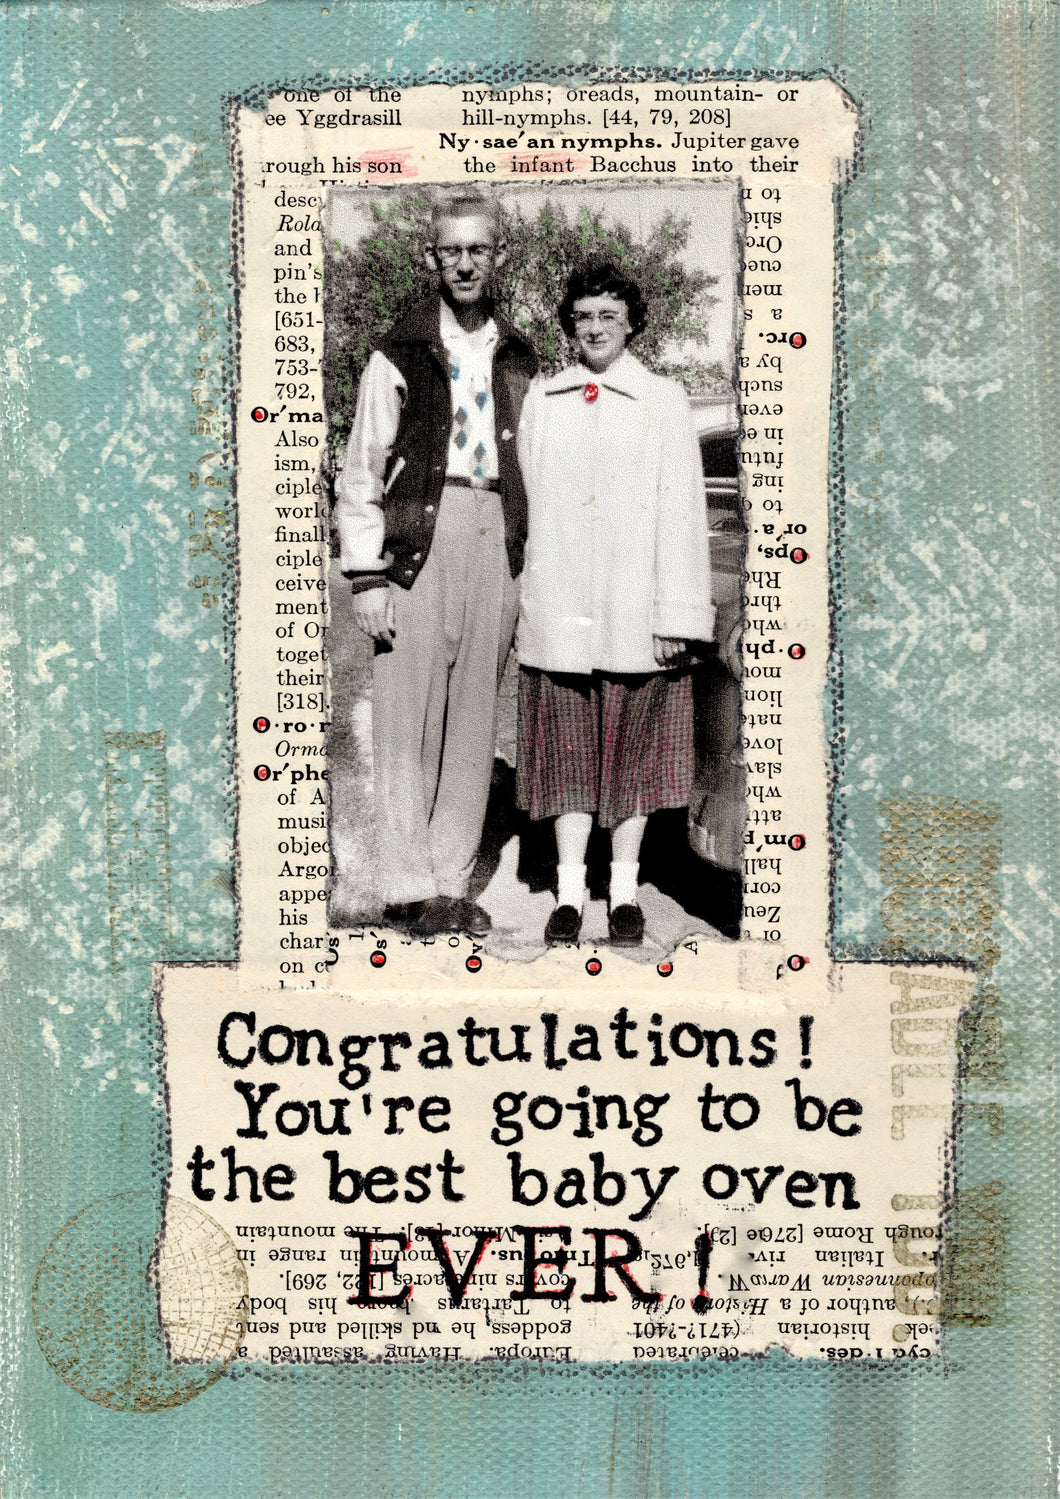 Congratulations you're going to be the best baby oven ever.